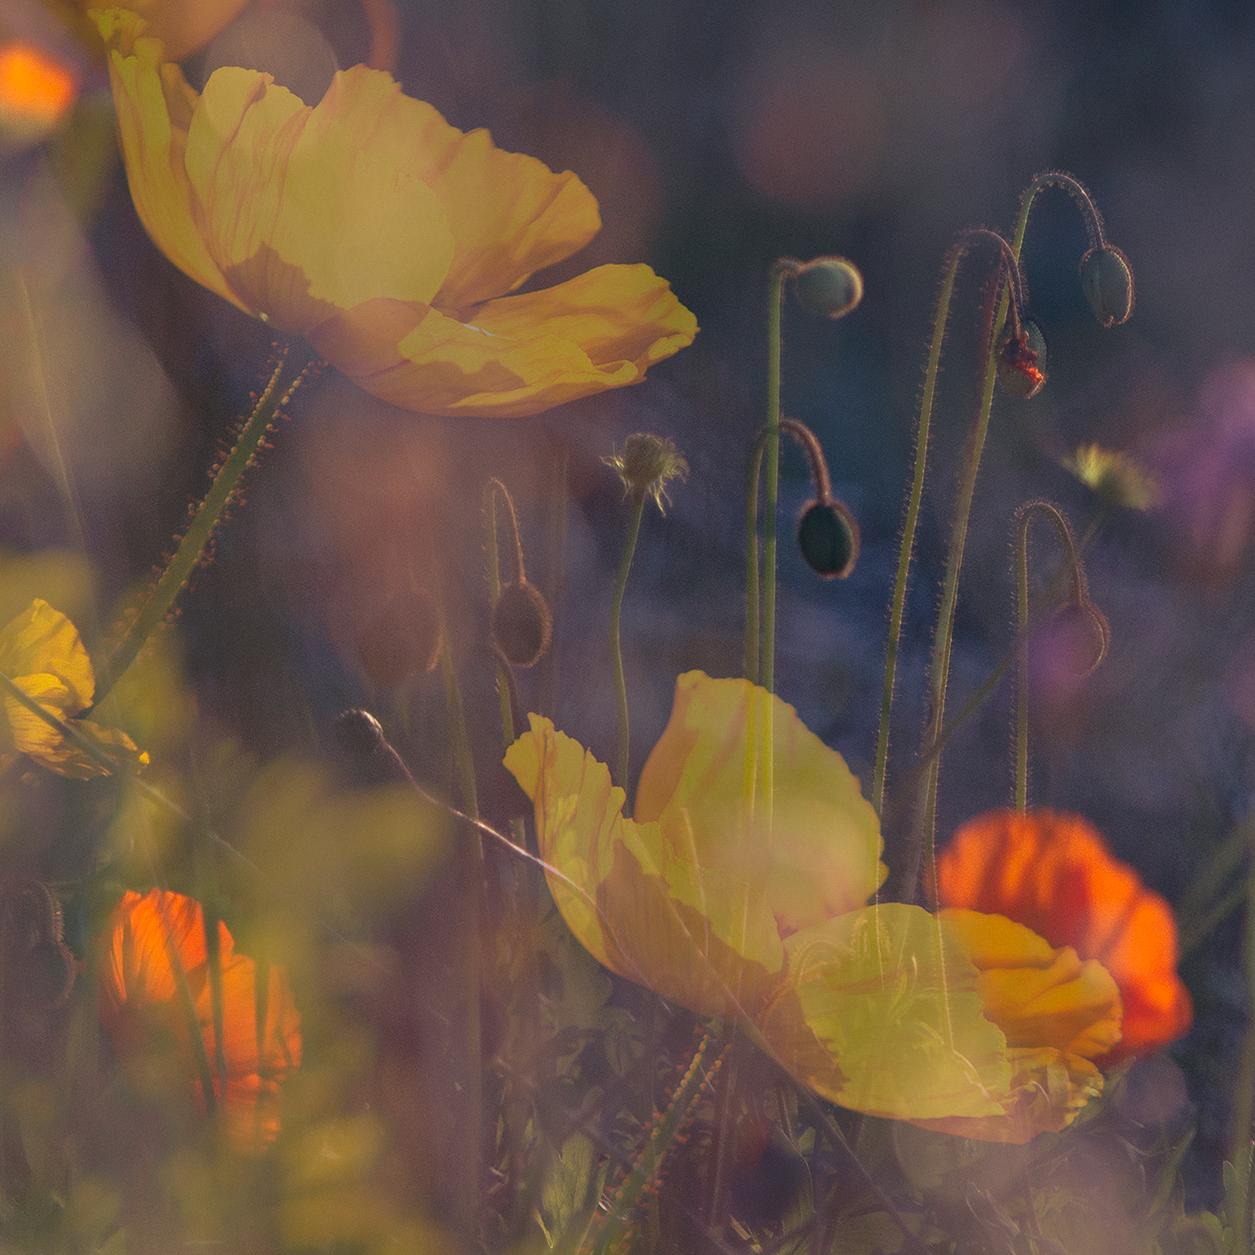 'Evening Poppies' ('Mono No Aware' Series)
Limited edition archival photograph. Unframed, hand signed and numbered
_________________
Buds, blooms, and the fading glories of Icelandic poppies capture the glow of the evening sun. Using intricate